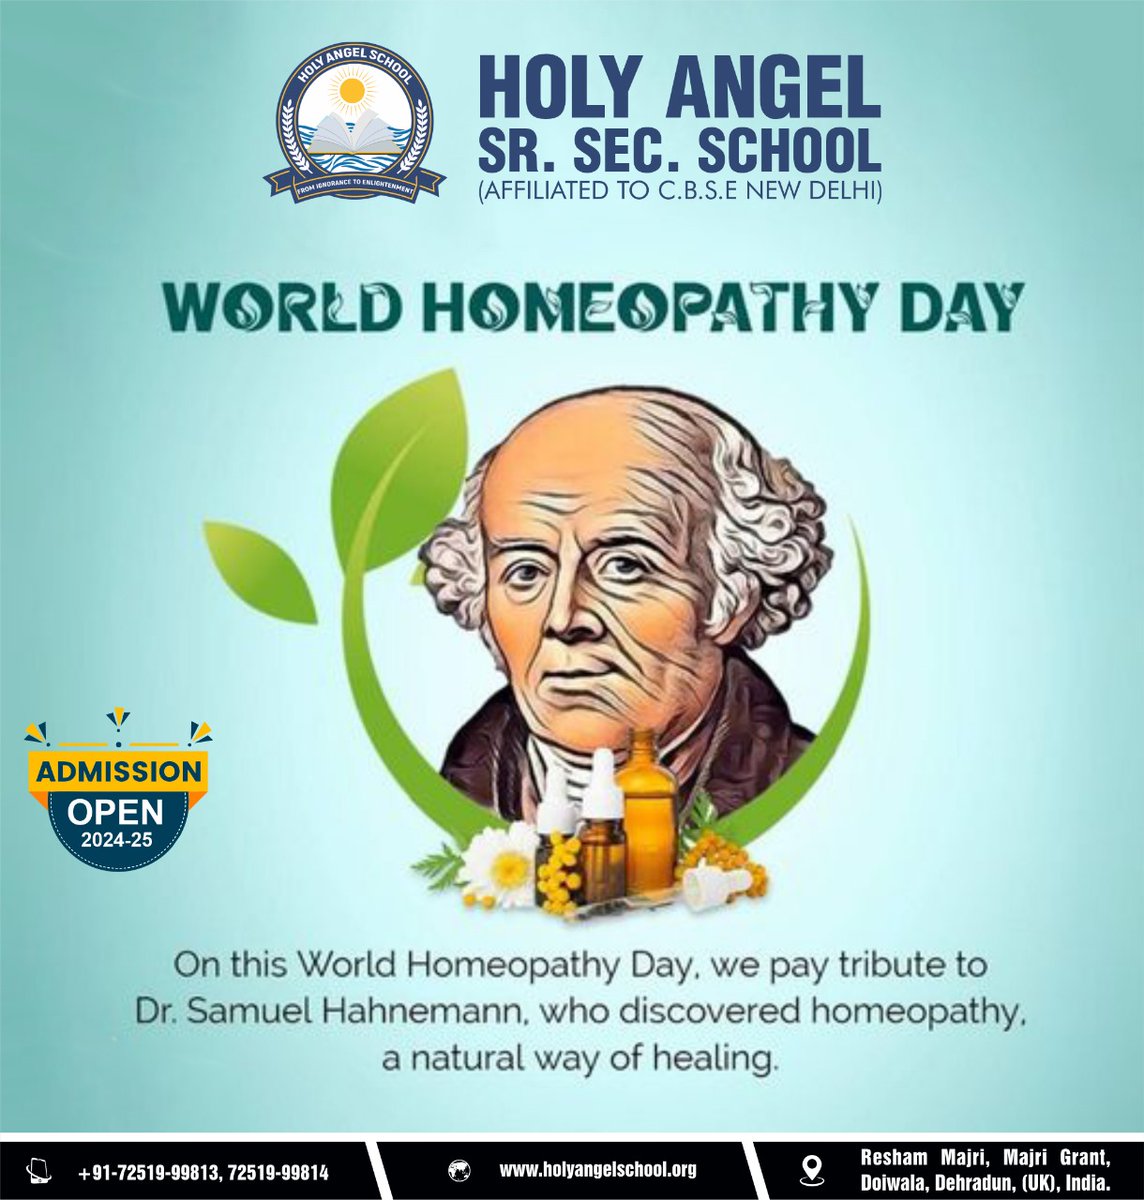 'Homeopathy is the art of healing the sick by stimulating the body to heal itself.' 
#WorldHomeopathyDay #HomeopathyAwareness #HomeopathyWorks
Holy Angel School
☎Call US- +91-7251999813, +91-7251999814
📍Visit Website- holyangelschool.org